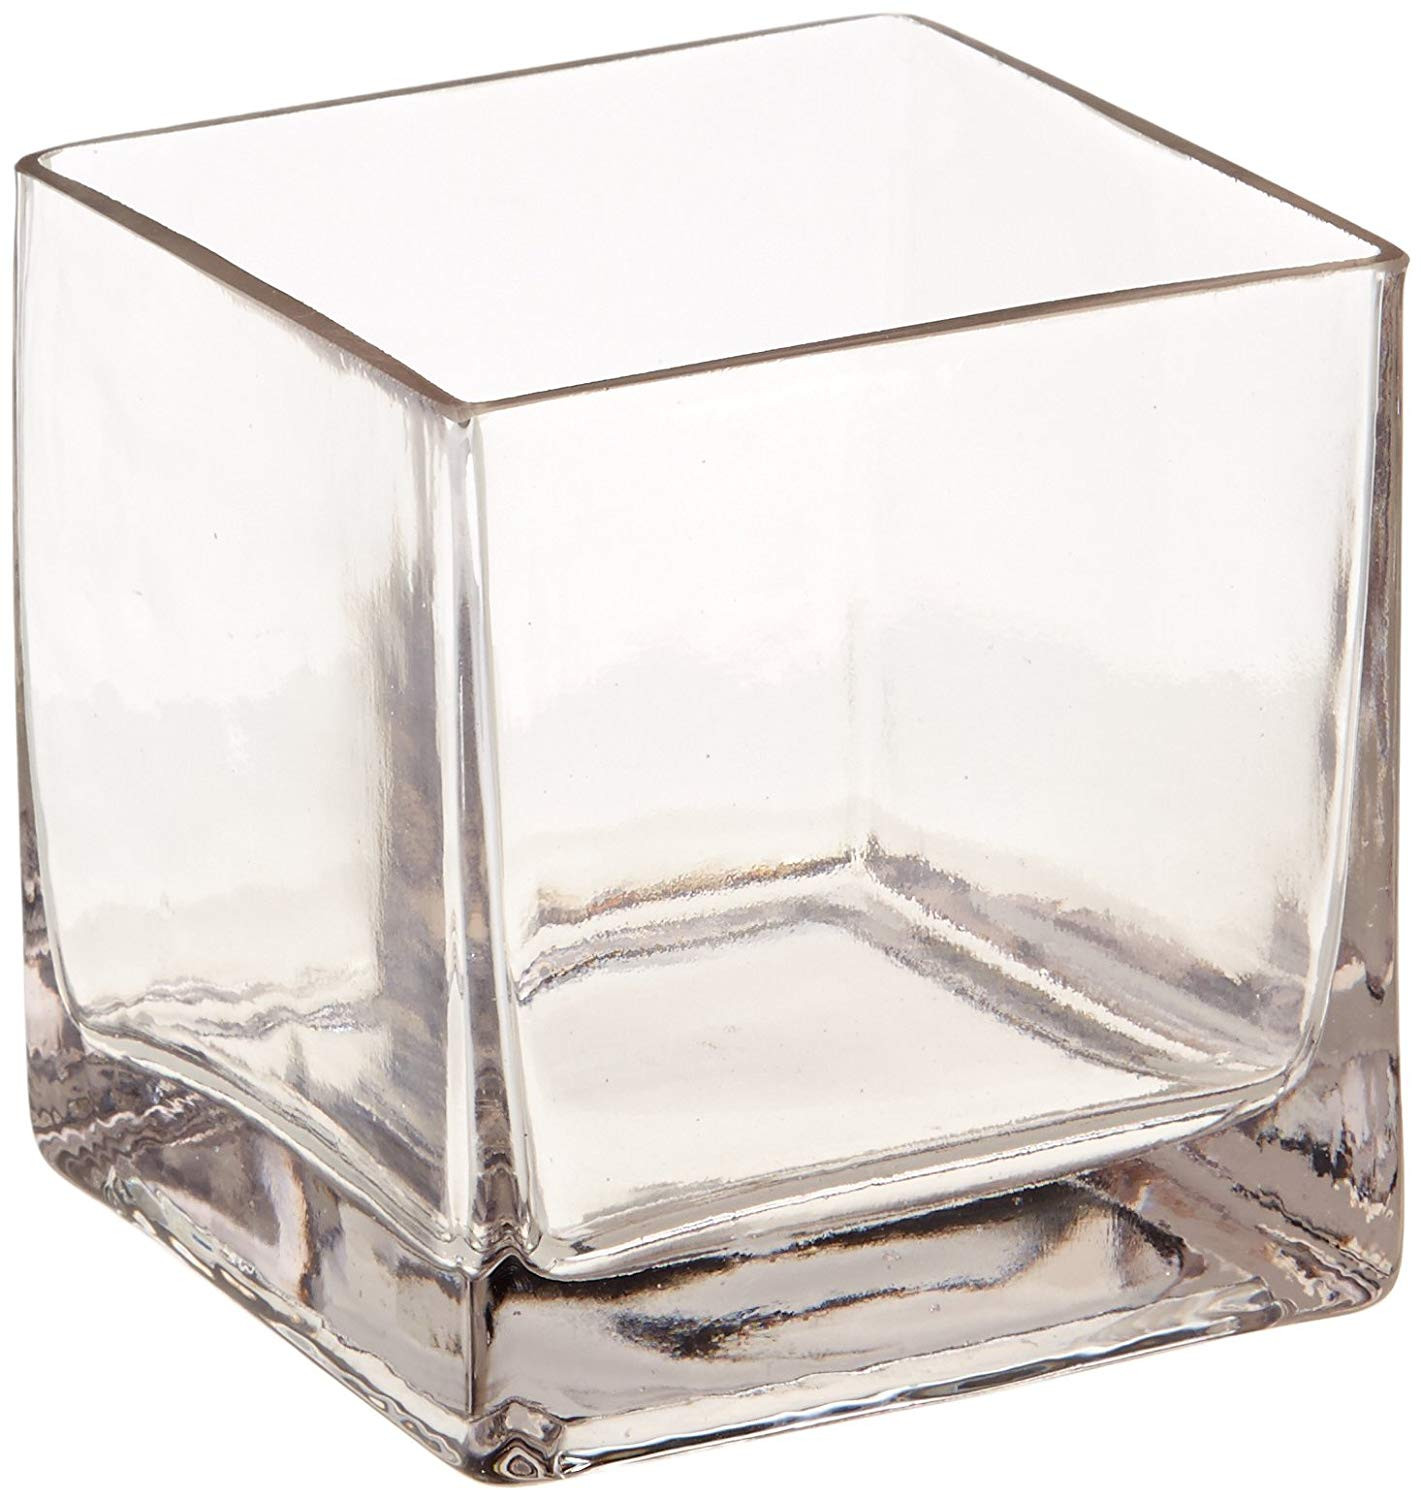 21 attractive Large Clear Vases wholesale 2024 free download large clear vases wholesale of amazon com 12piece 4 square crystal clear glass vase home kitchen inside 71 jezfmvnl sl1500